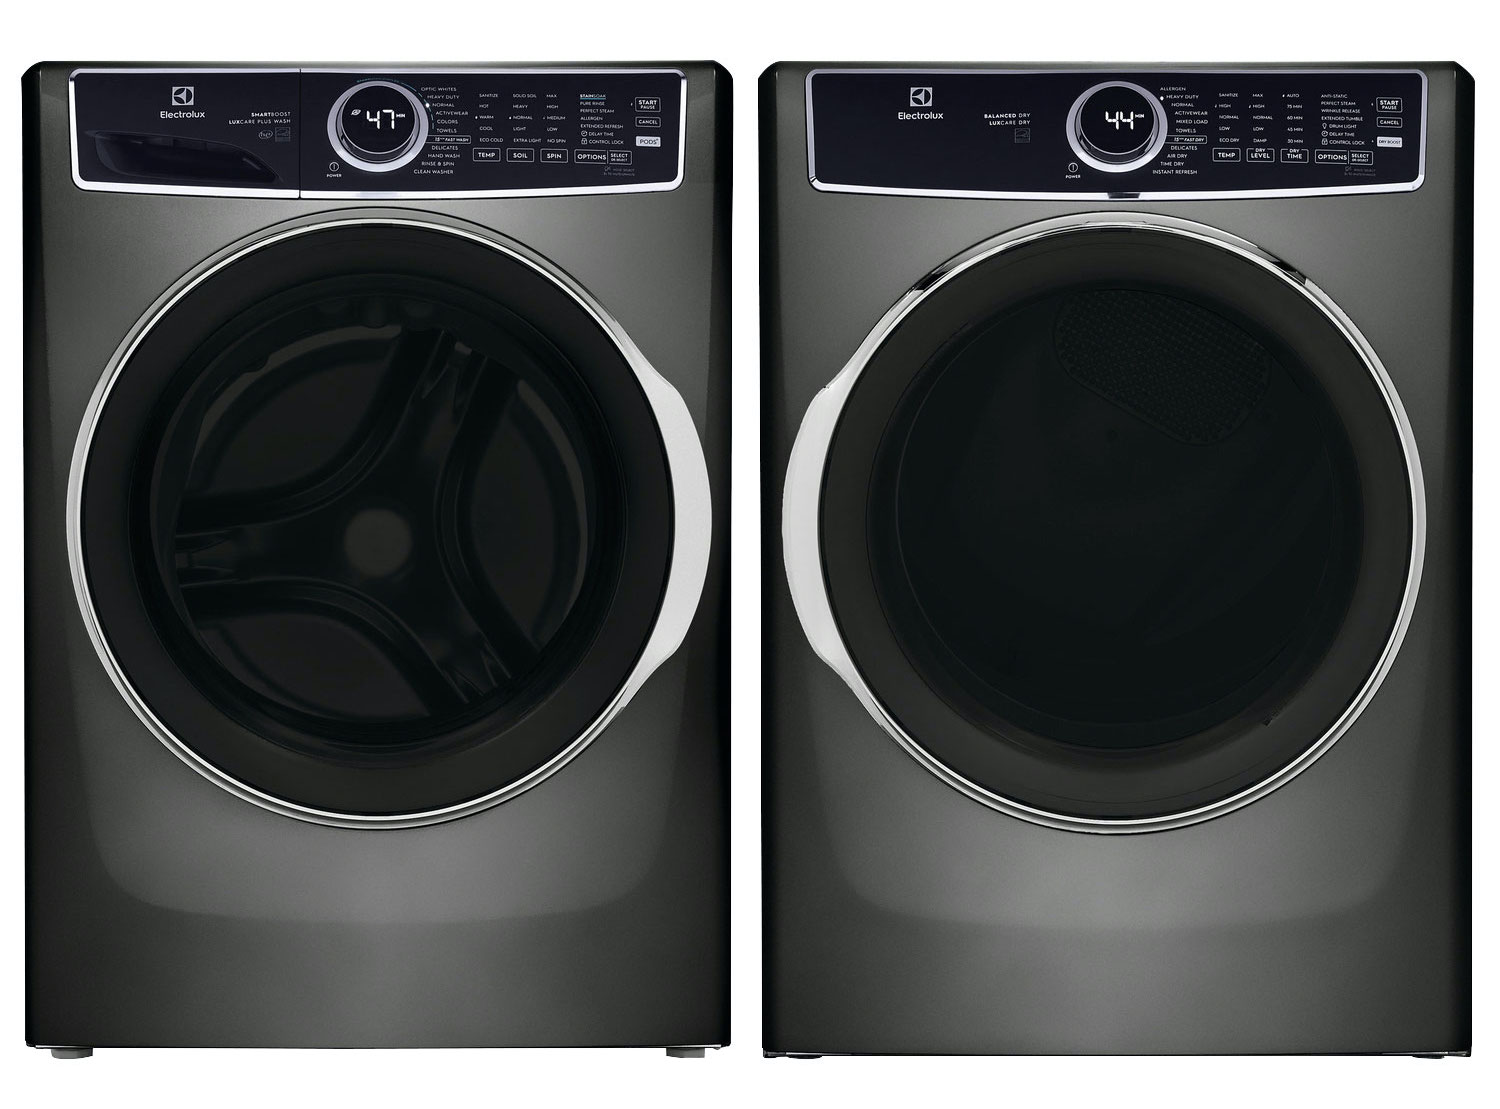 Electrolux washer dryer moving